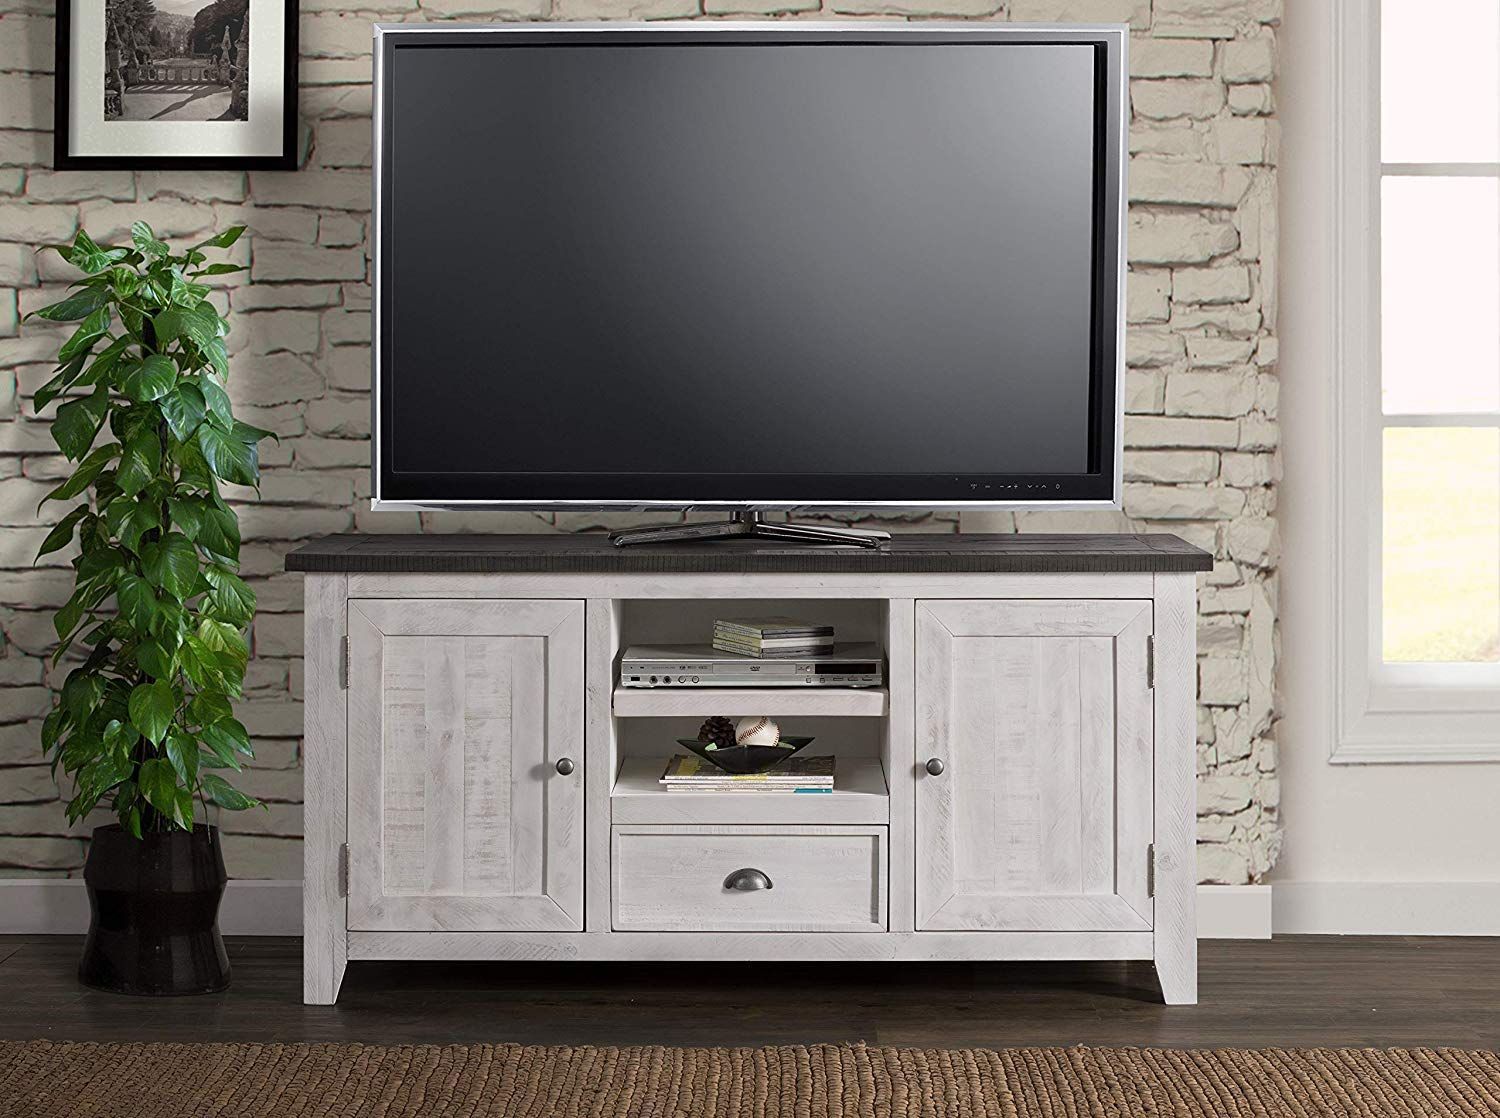 Farmhouse Tv Stand: Cozy And Functional Entertainment Centers – Farmhouse  Goals | Farmhouse Tv Stand, Rustic Tv Stand, Solid Wood Tv Stand With Regard To Farmhouse Stands For Tvs (View 4 of 15)